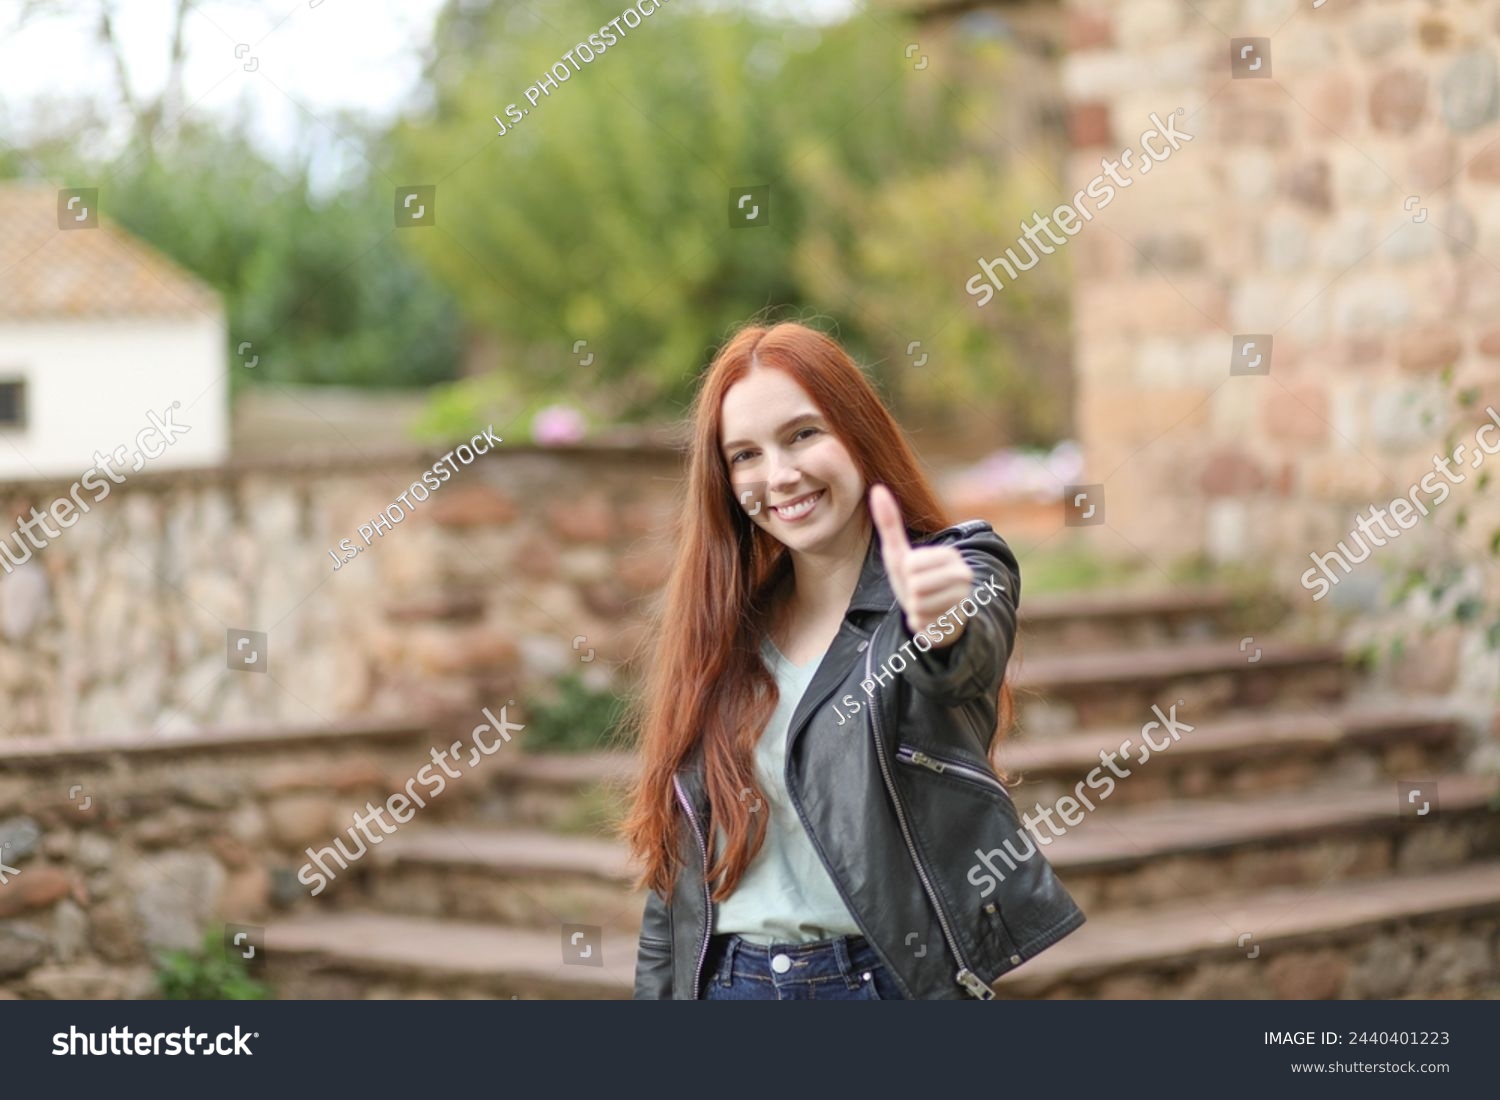 Young woman with long hair extends her hand and raises her thumb giving her approval #2440401223